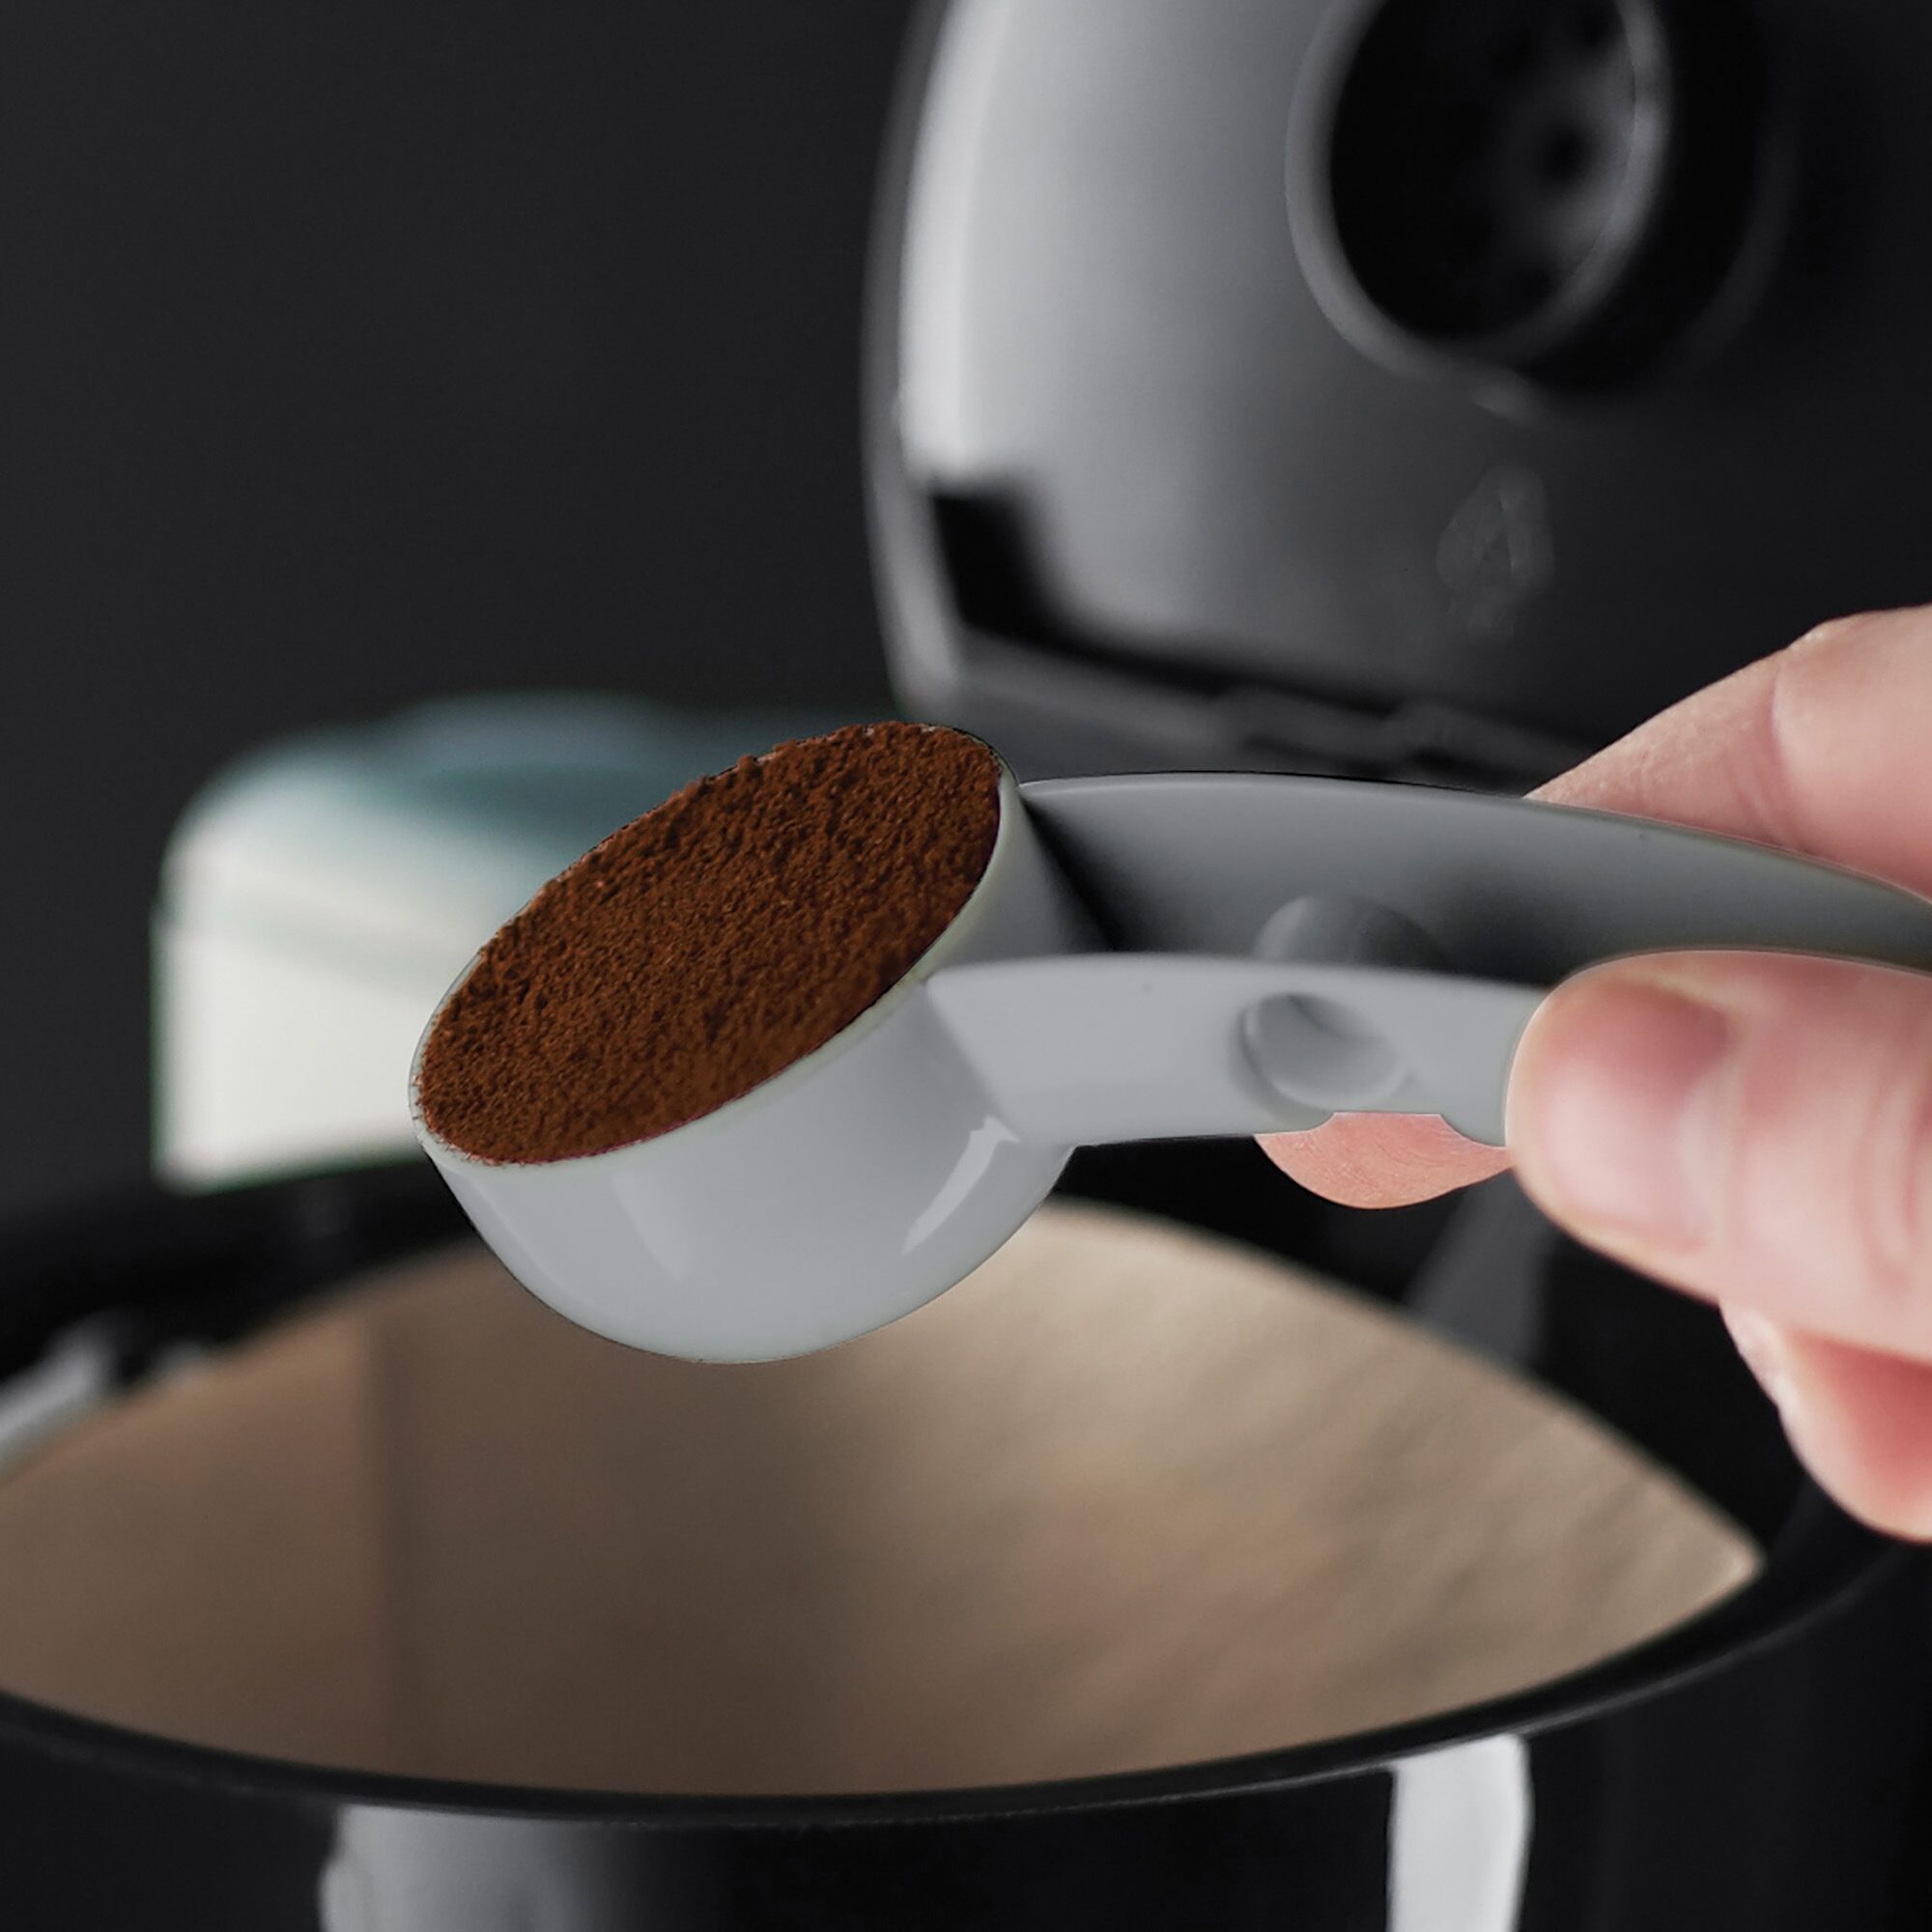 Easy 8 cup coffee maker being used to make coffee.